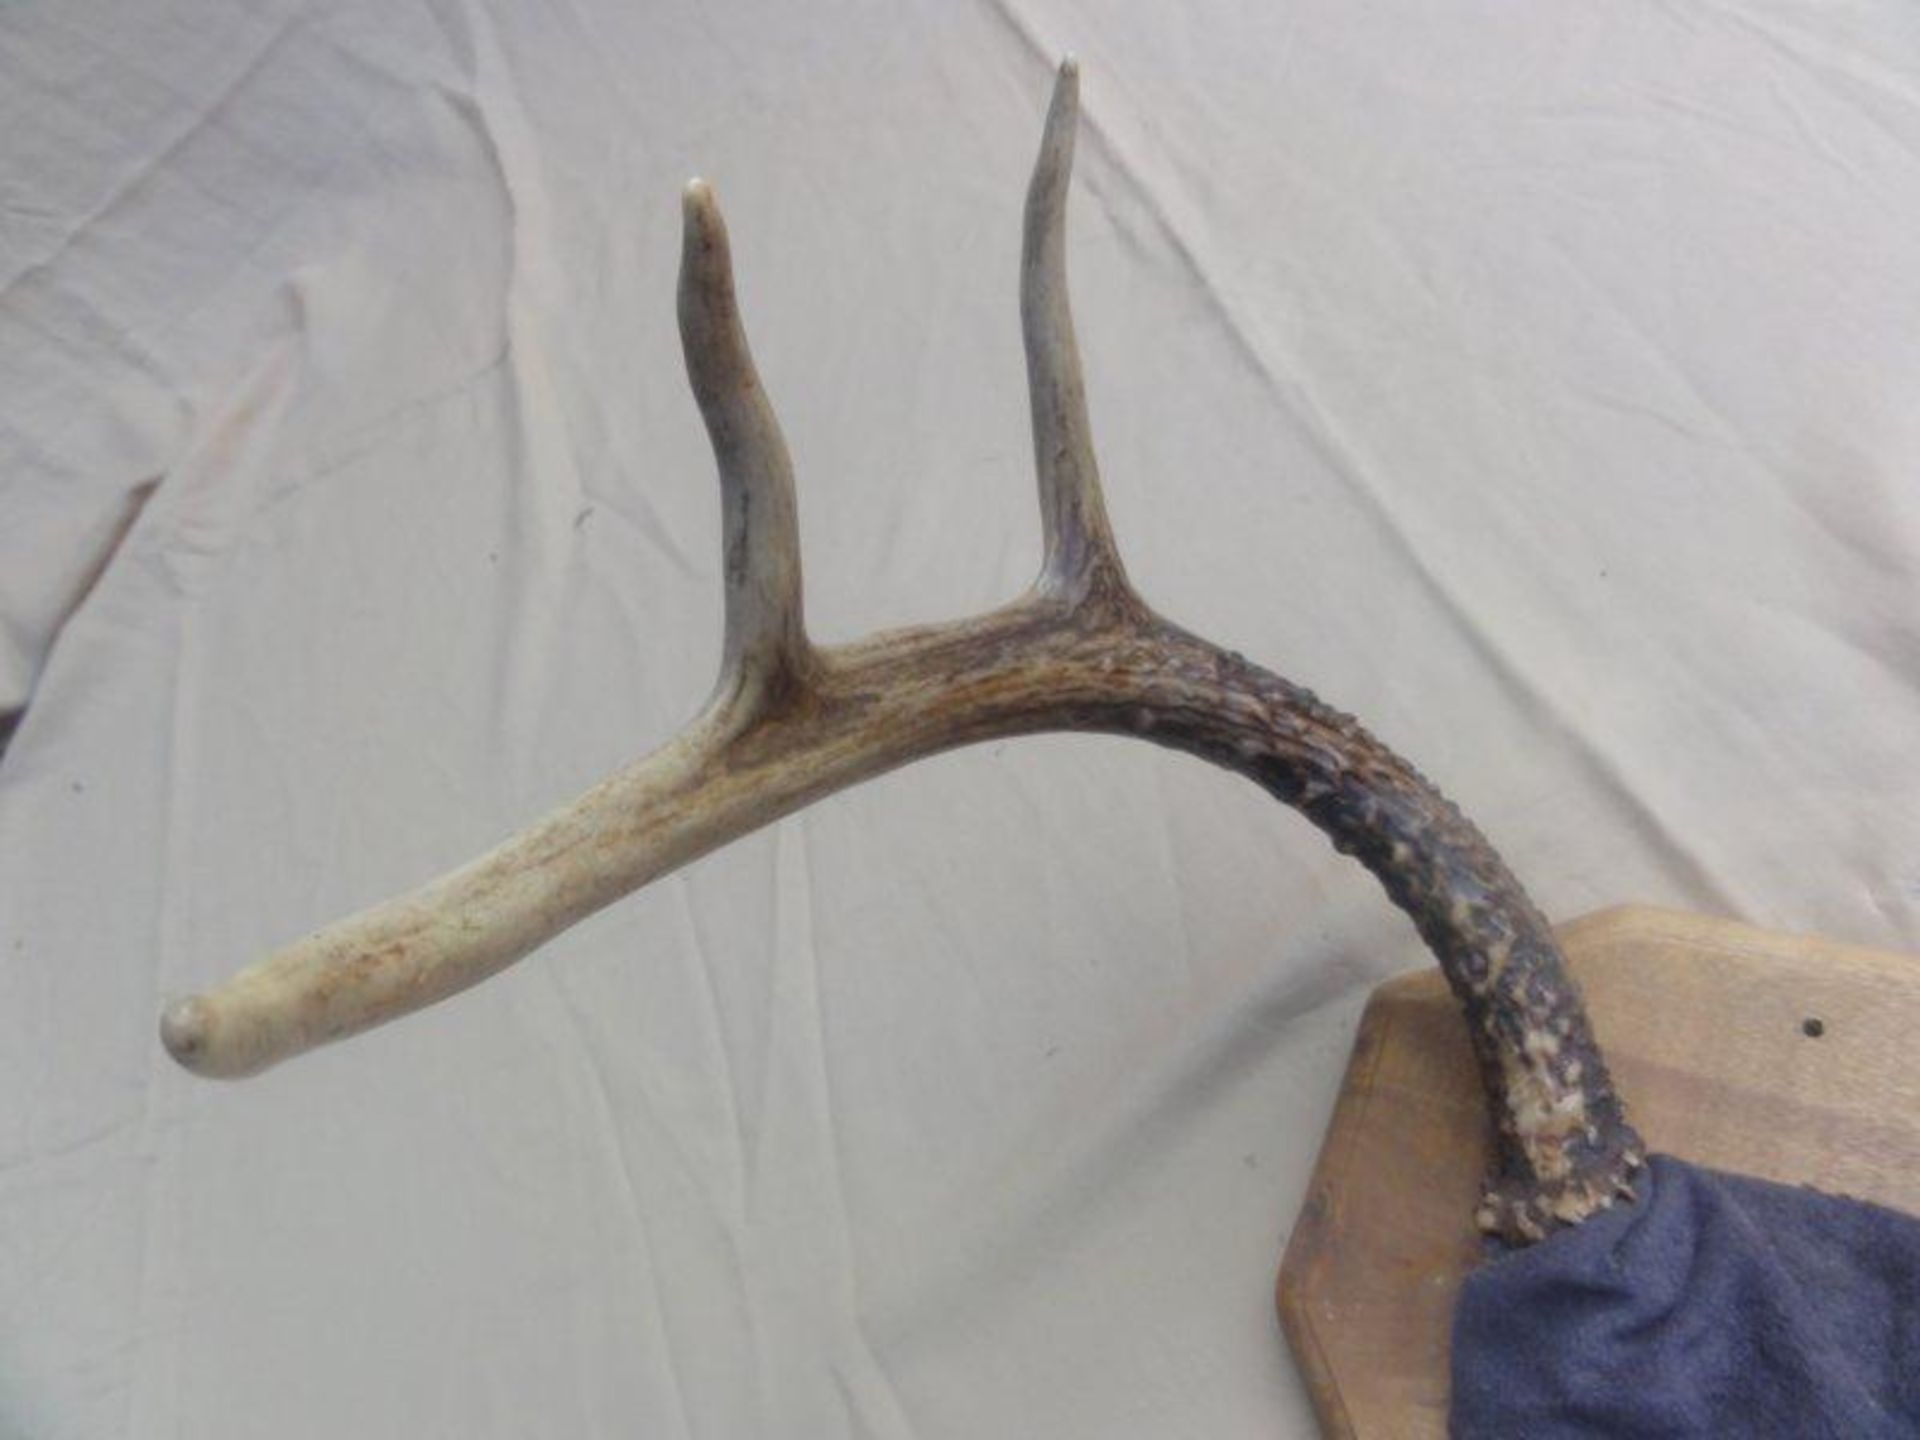 6-Point Antler Mount. Overall Great Condition - Image 3 of 3